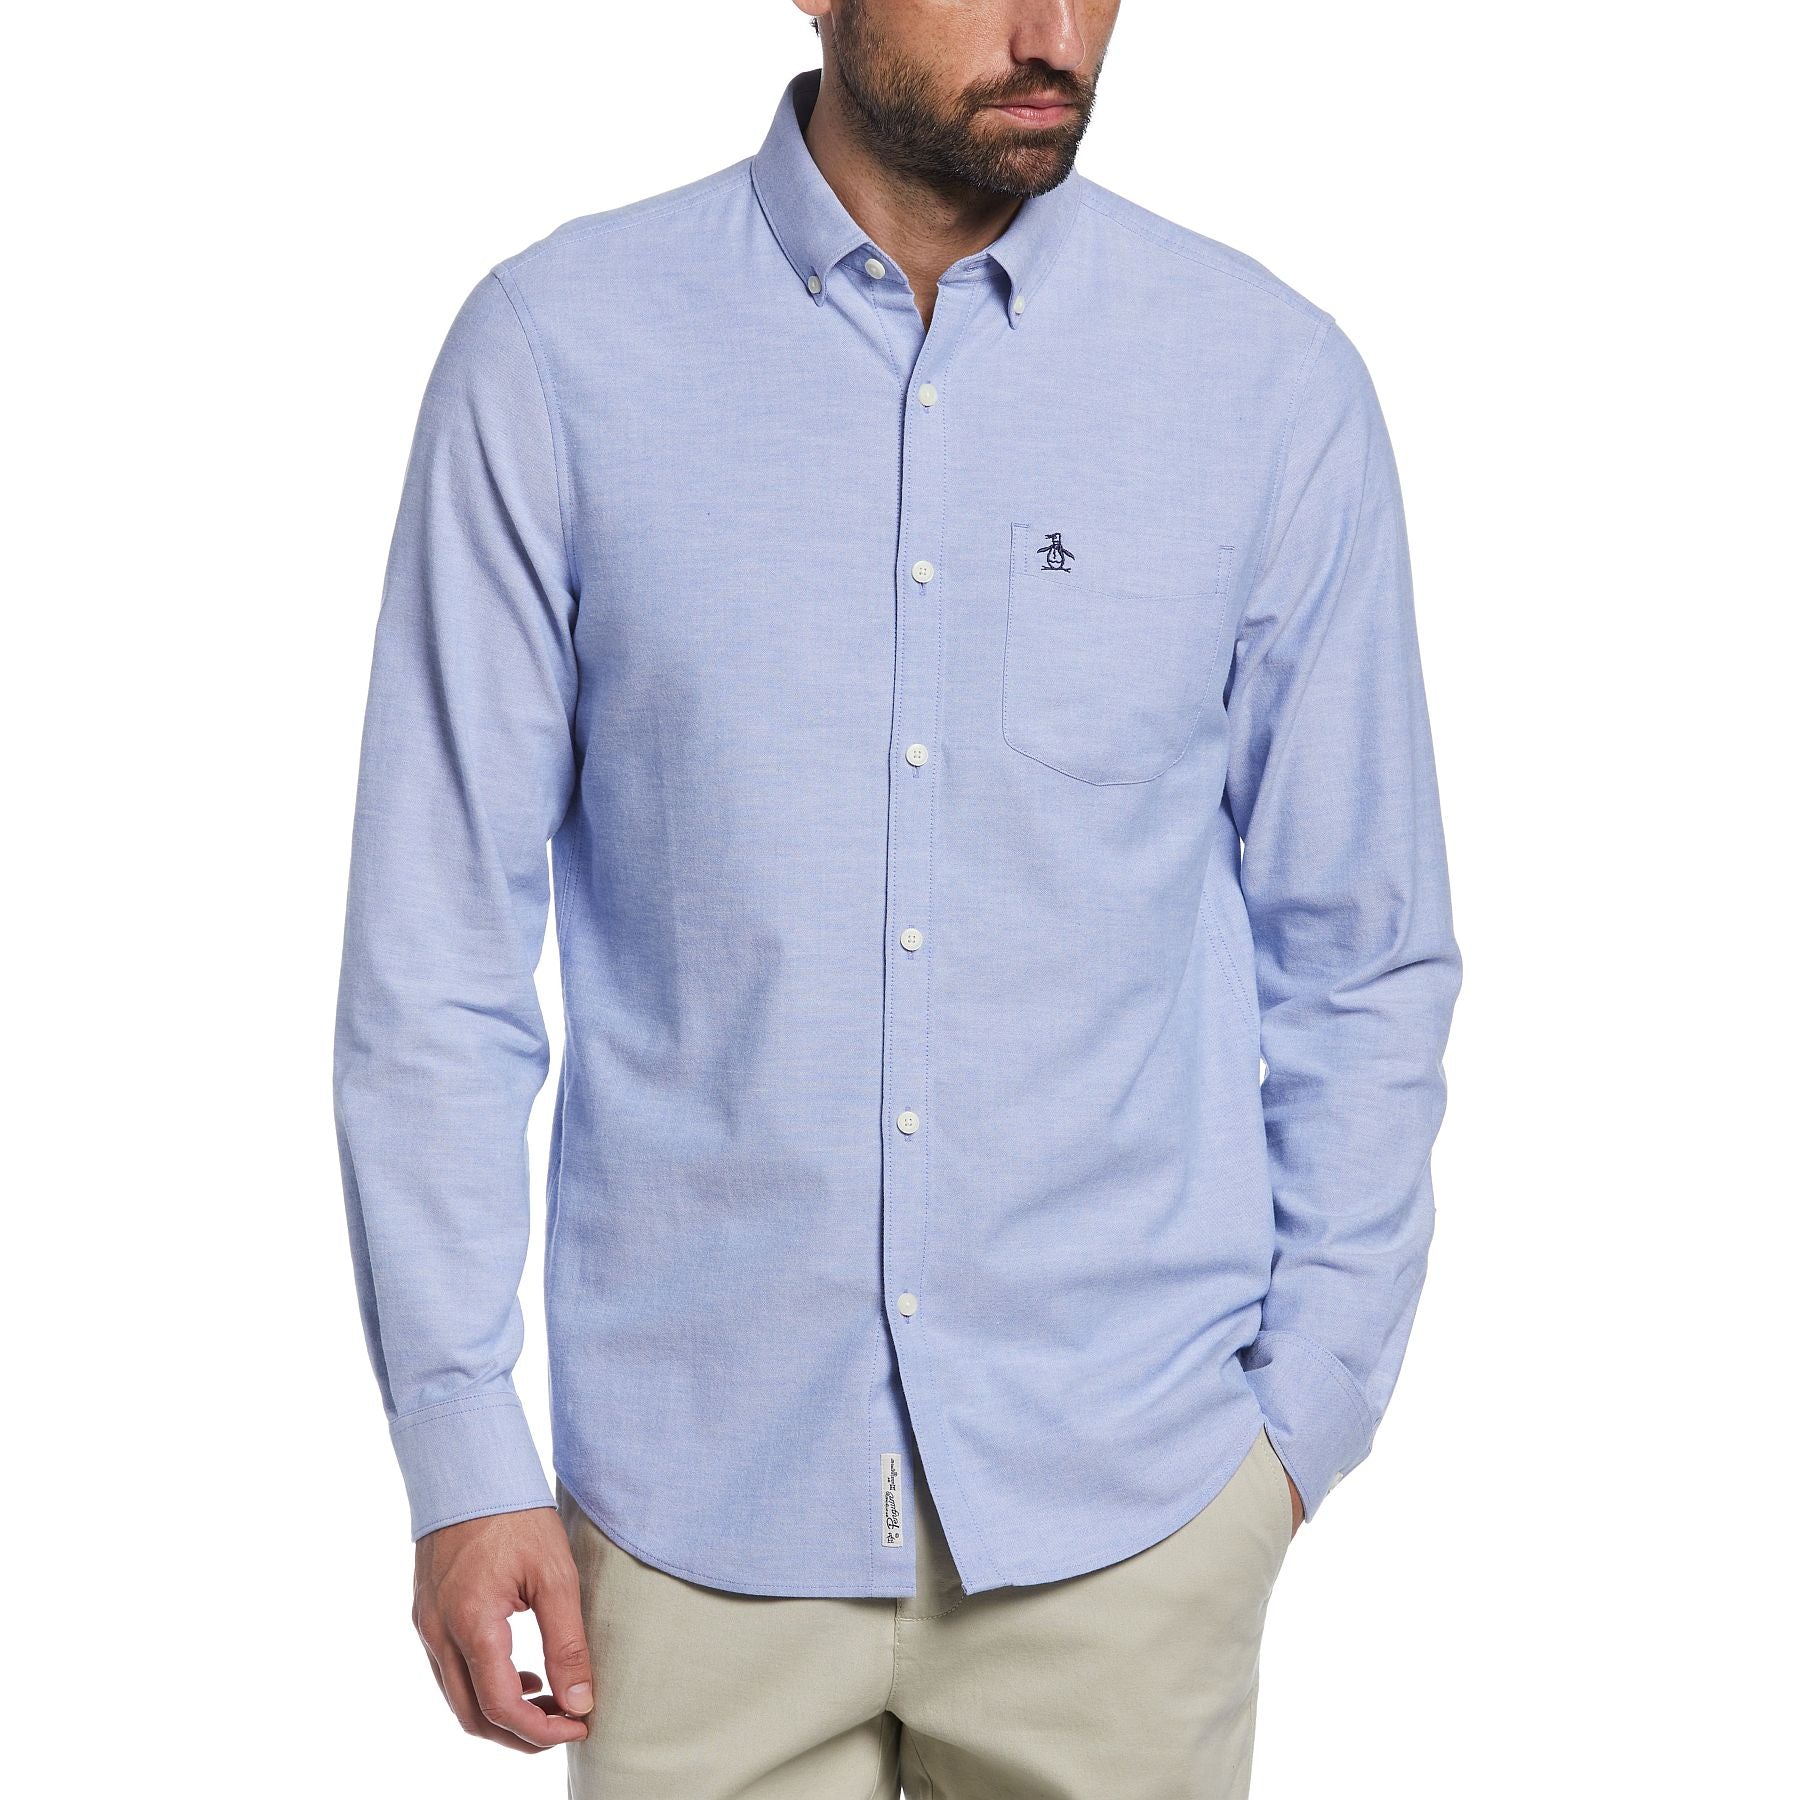 View Ecovero Oxford Stretch Shirt In Amparo Blue information